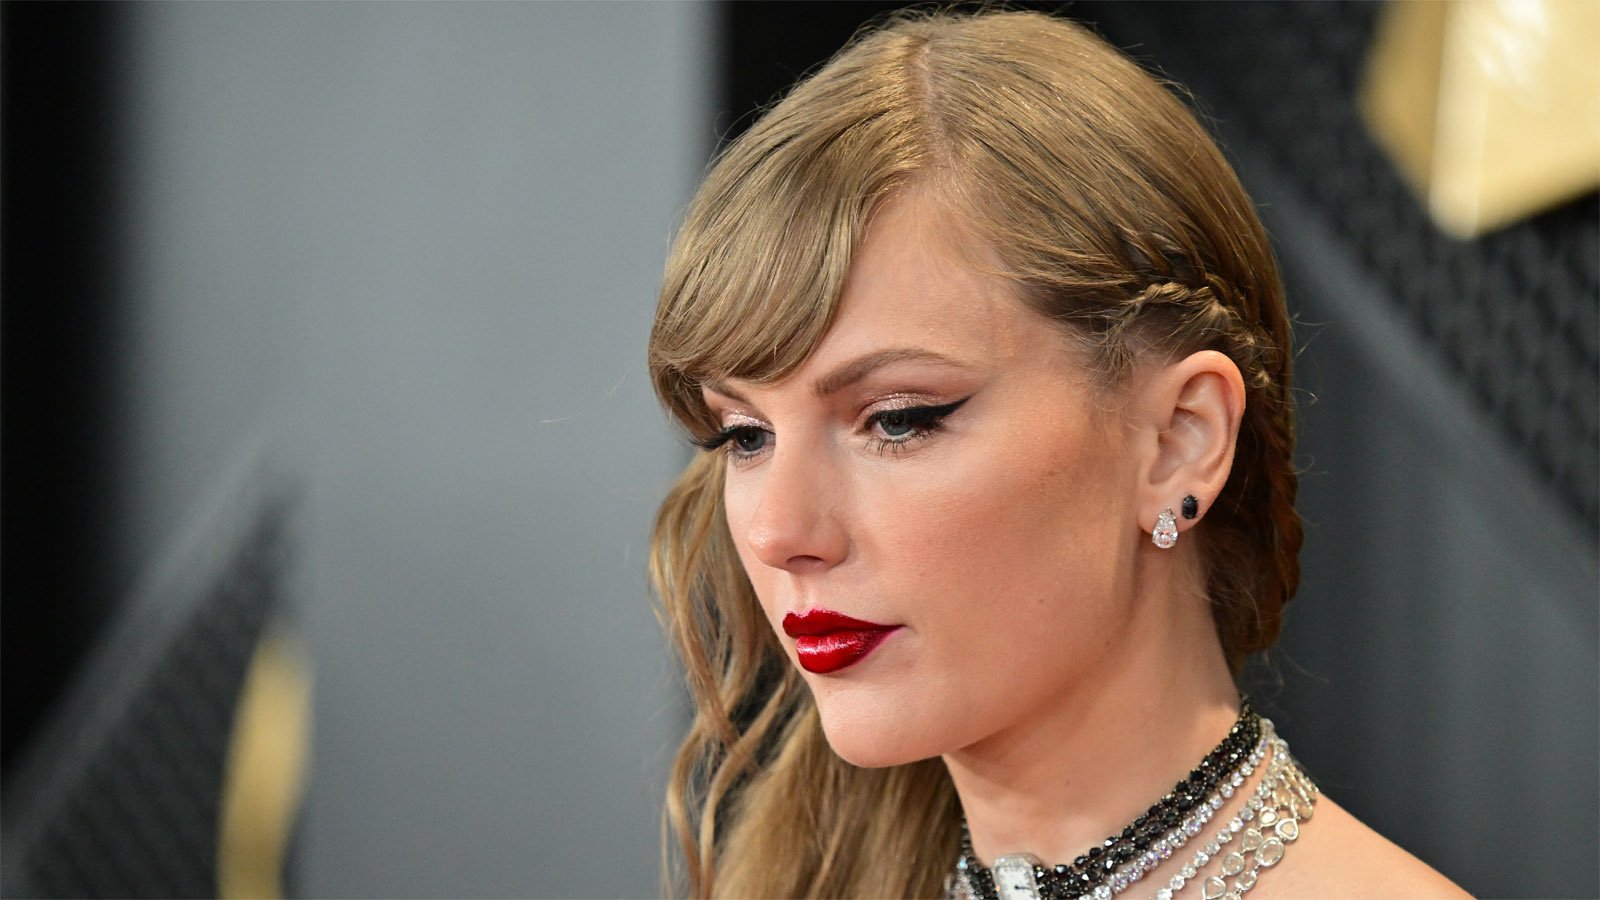 Taylor Swift’s Lawyers Threaten Student For Tracking Her Jet: Call It ‘A Life-Or-Death Matter’